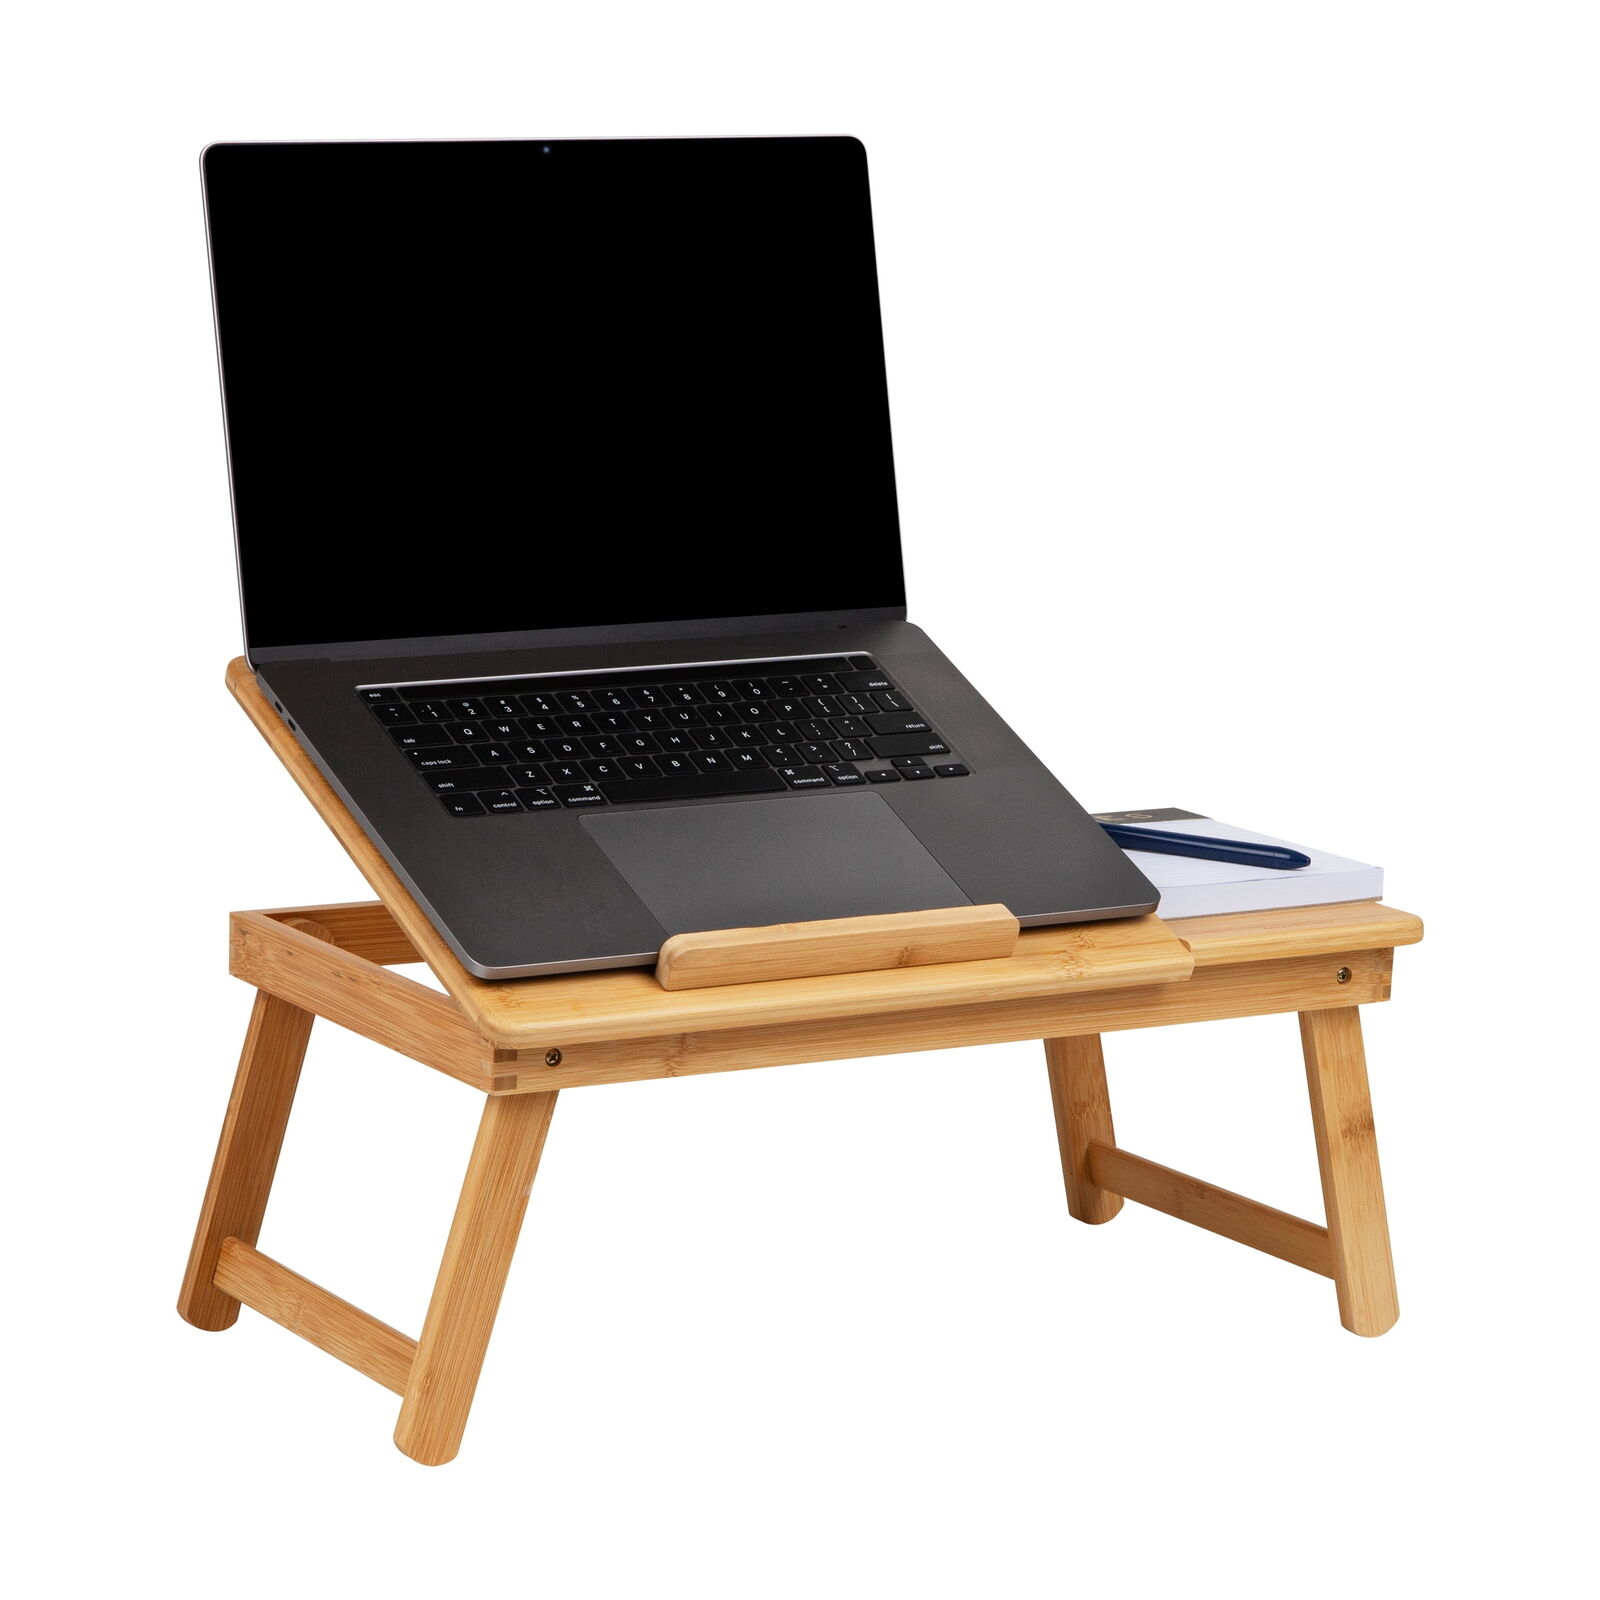  Lap Desk Laptop Stand, Bed Tray,Dorm Room,Folding Legs, Rayon From Bamboo,Brown